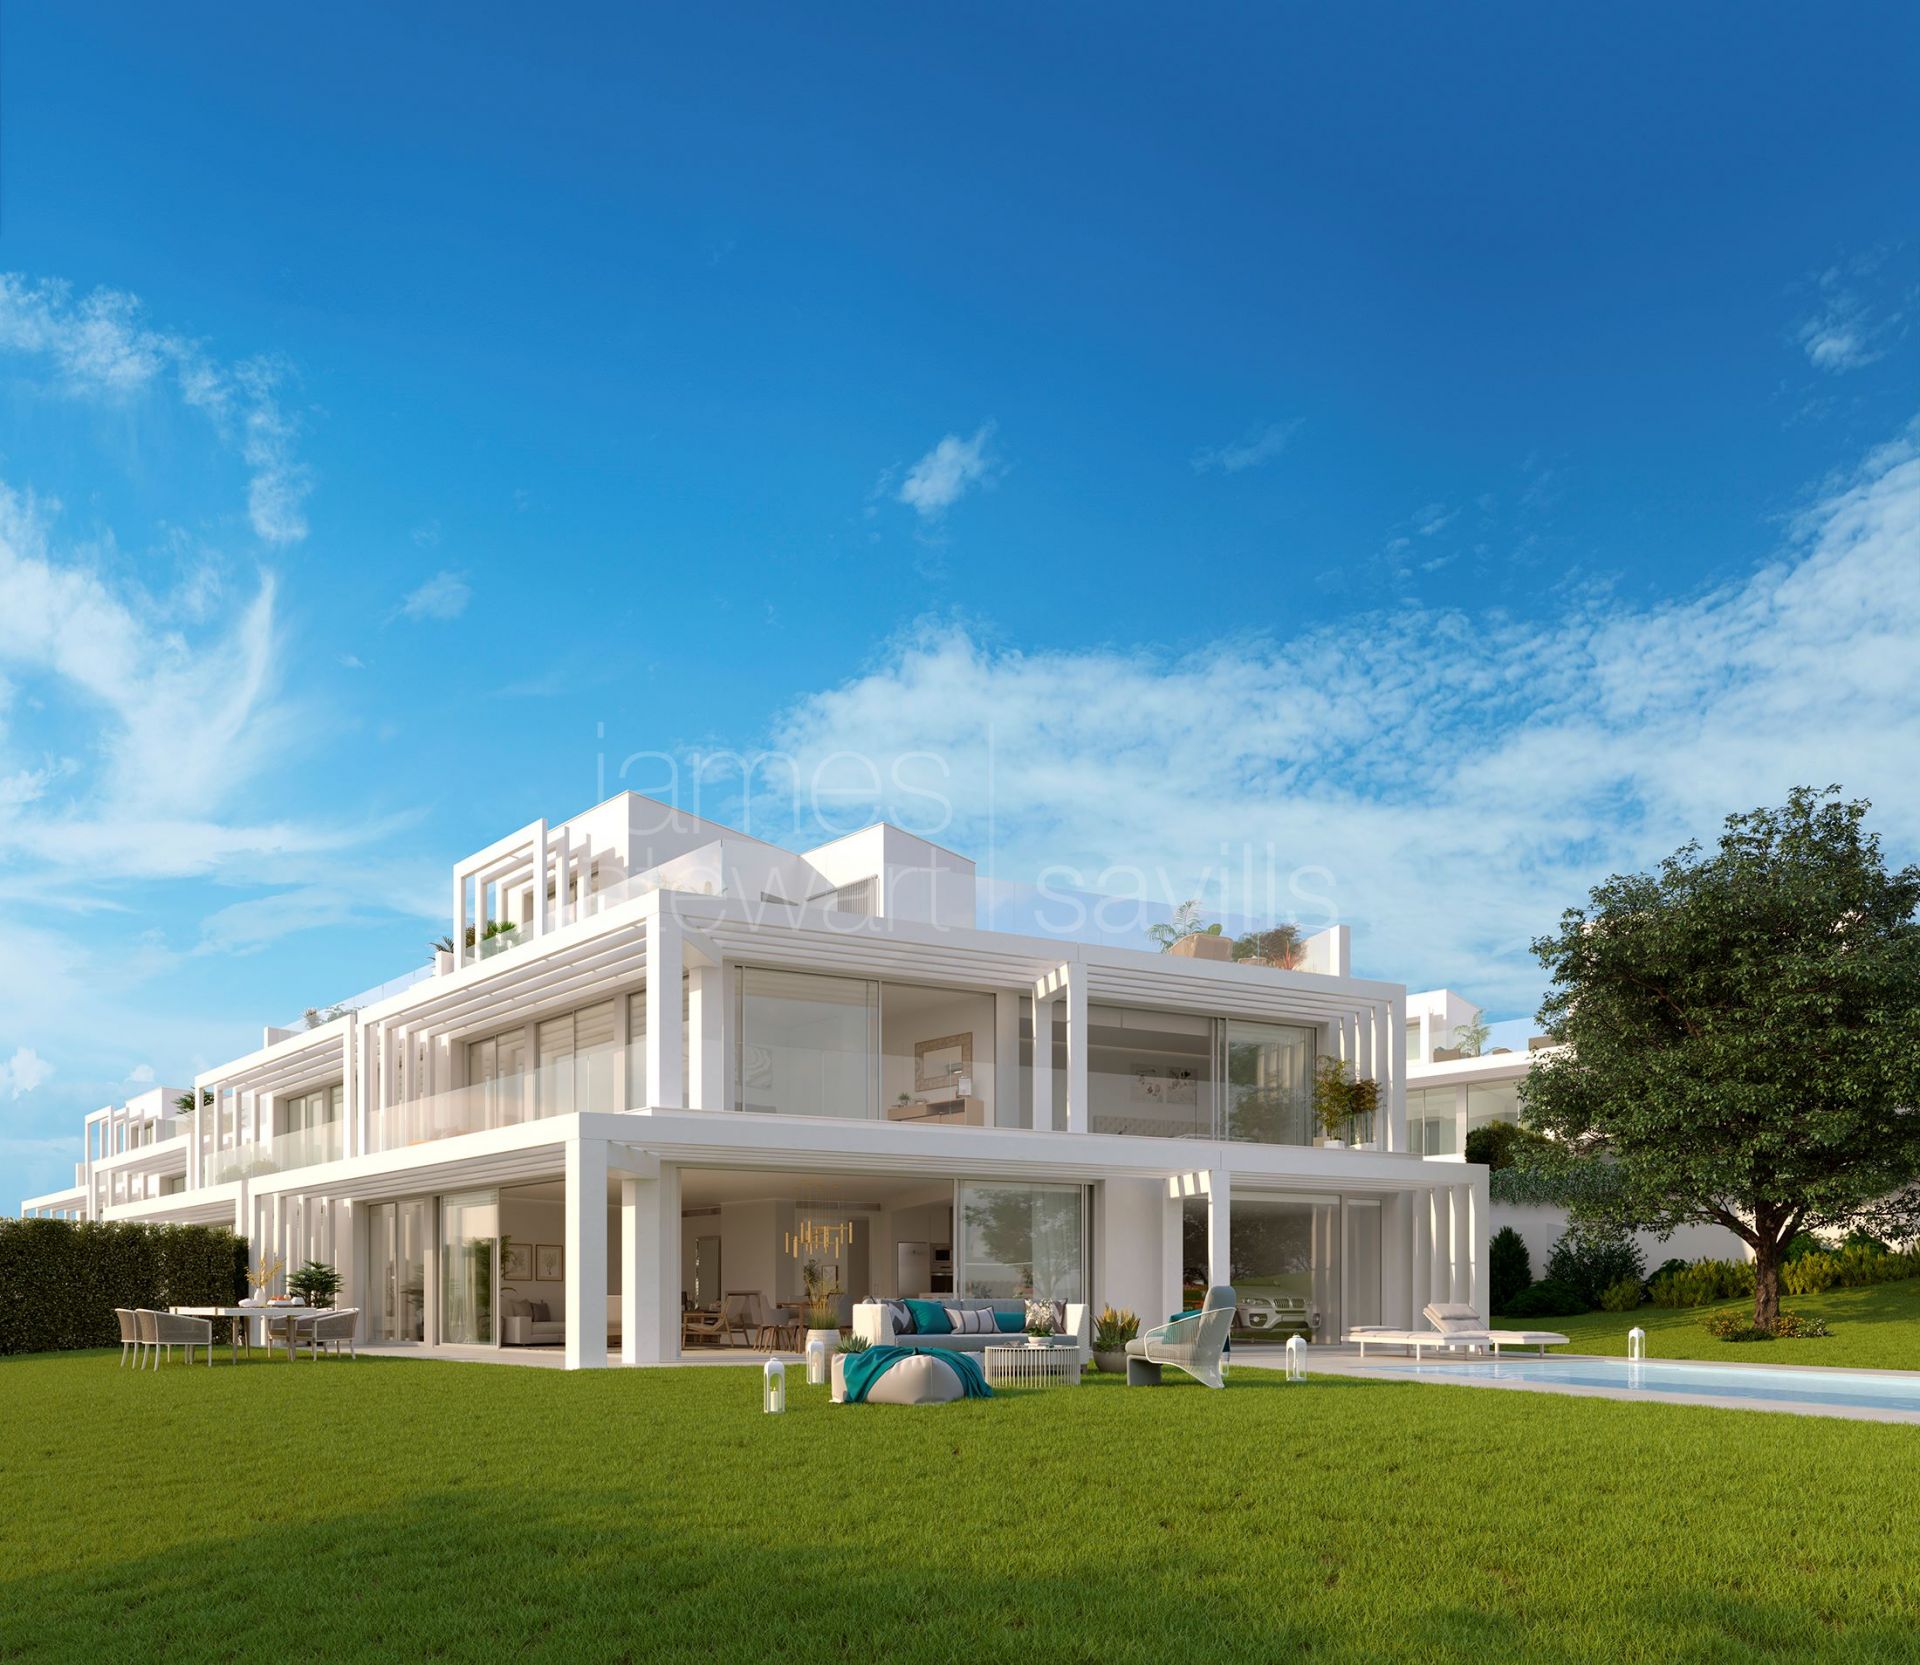 Brand new contemporary style development with lovely sea views - only the last units left